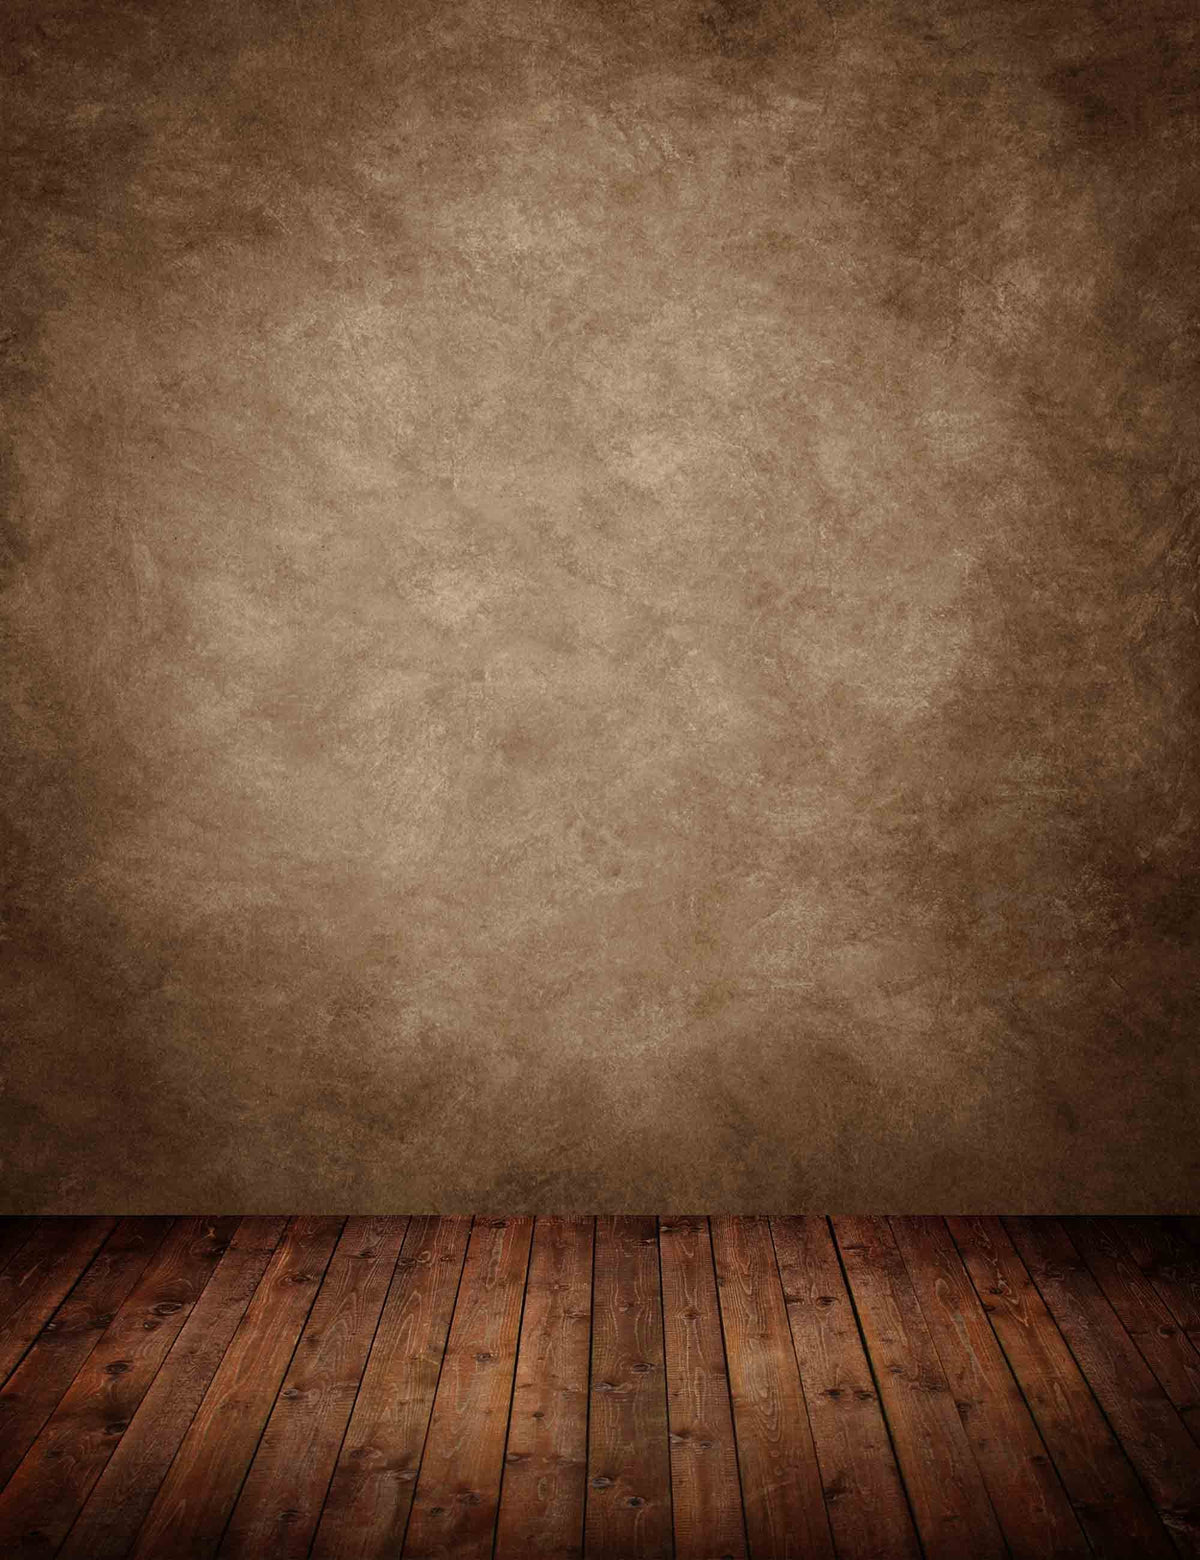 Cold Brown Solid Wall With Wood Floor Backdrop For Photography Shopbackdrop